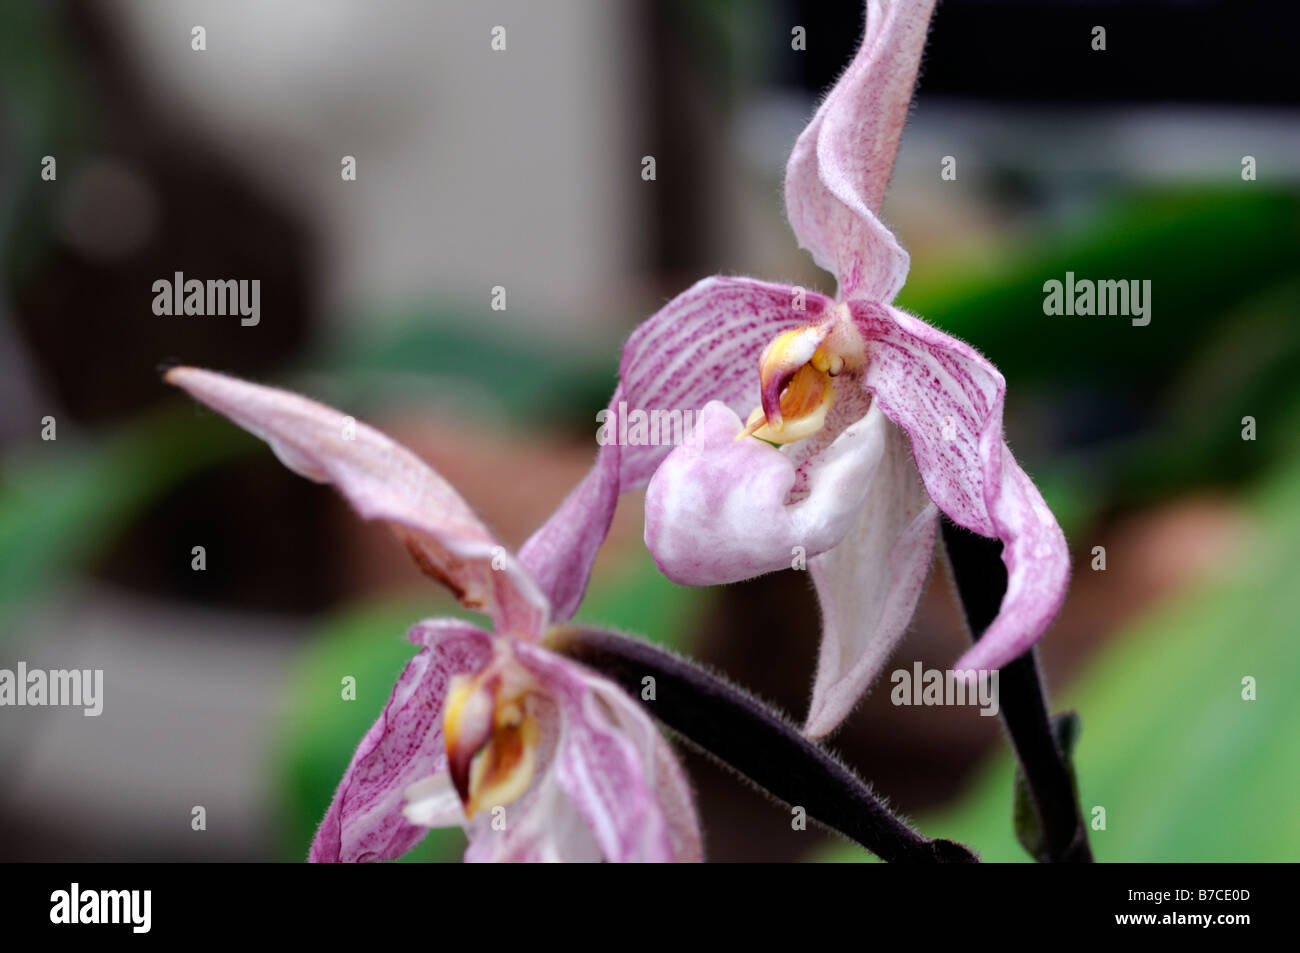 paphiopedilum pink lady's slipper orchid flower bloom blooming flowering Stock Photo